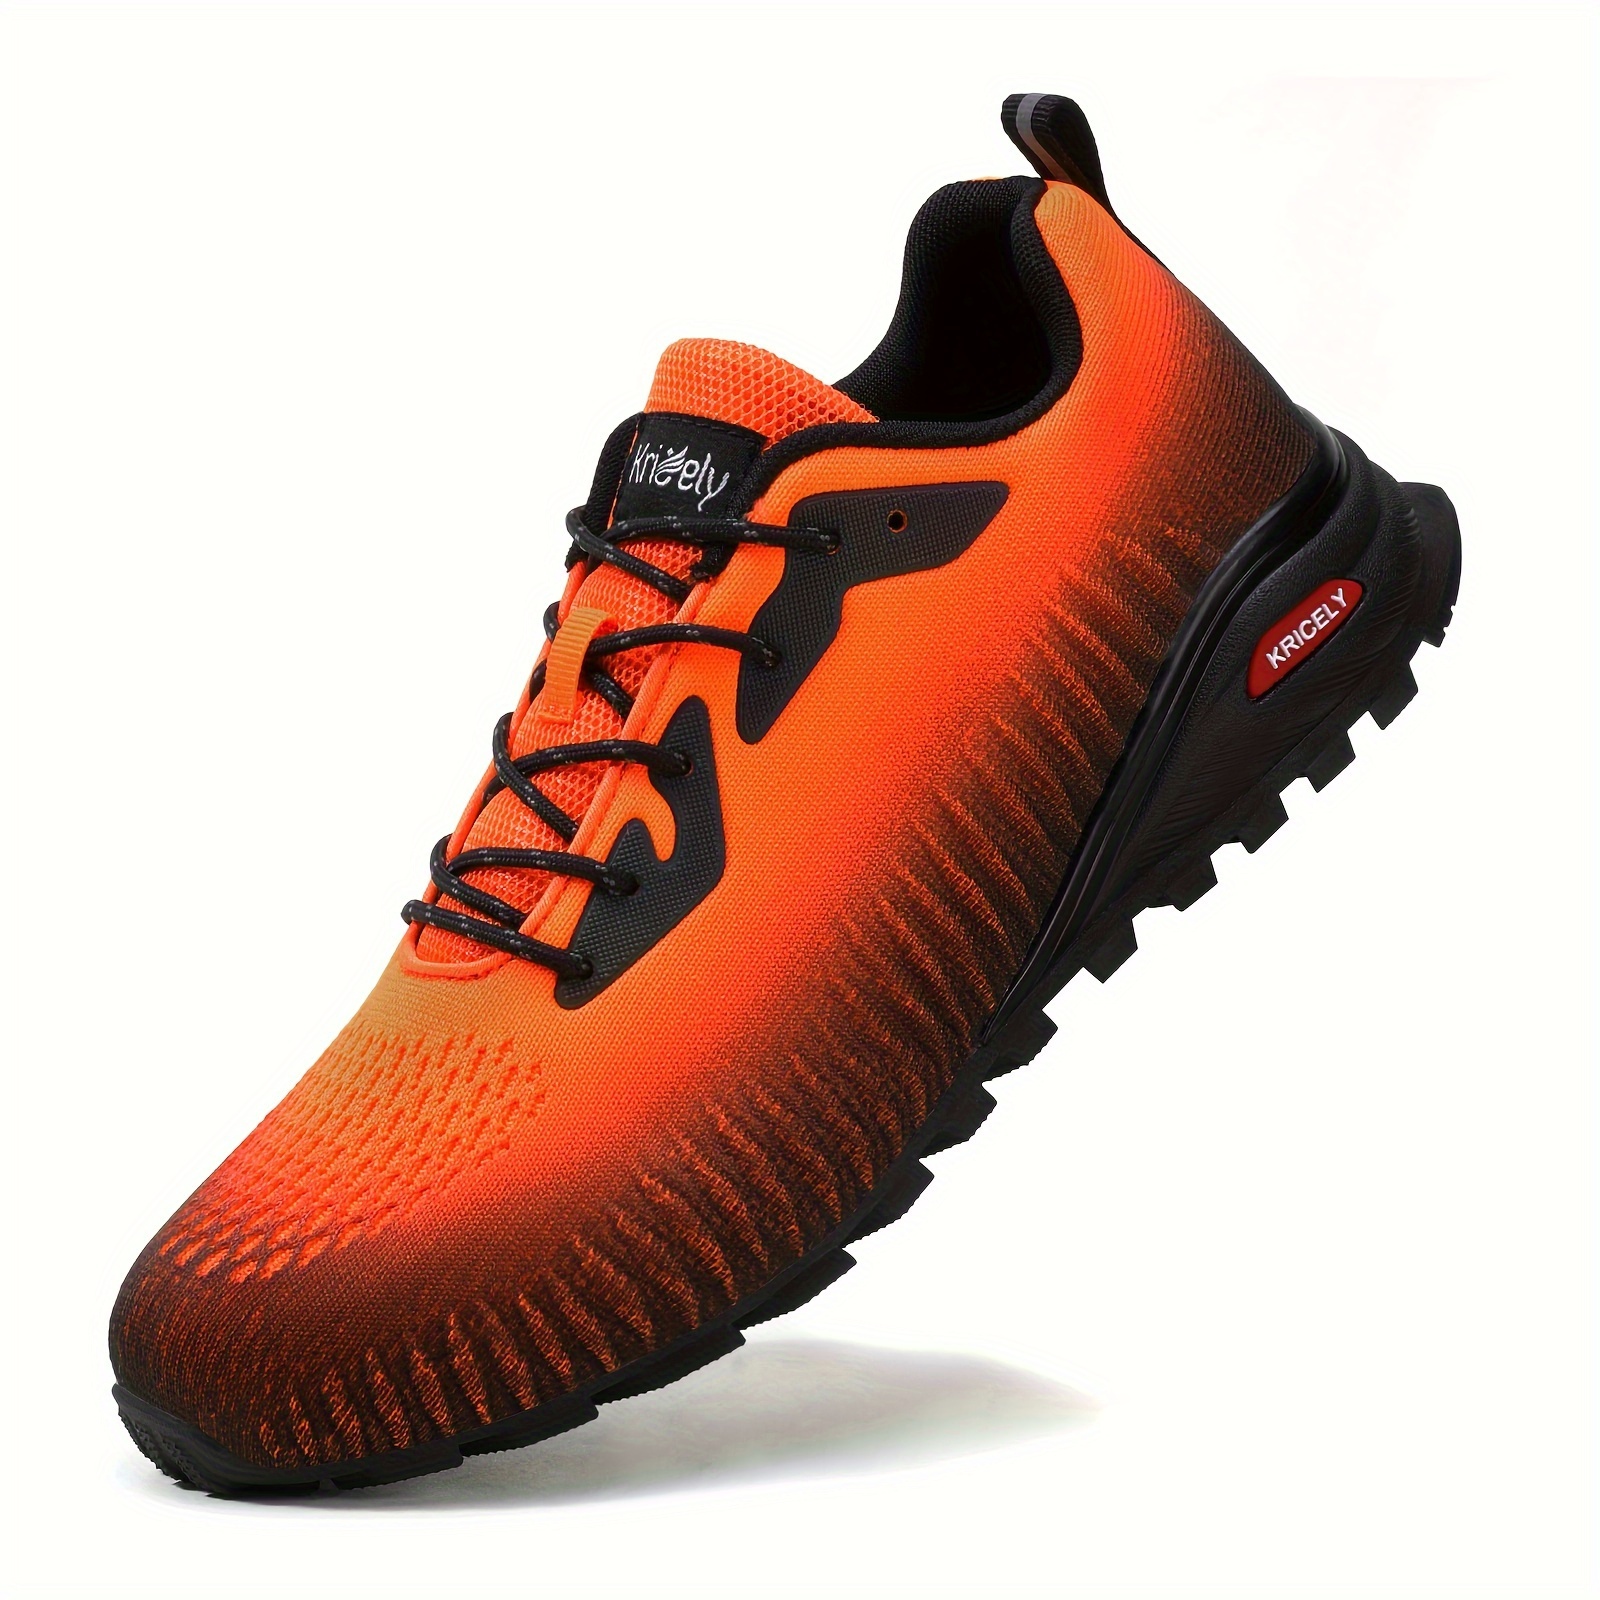 

Men's Walking Shoes Breathable Lightweight Fashion Sneakers Non Slip Sport Gym Jogging Trail Running Shoes